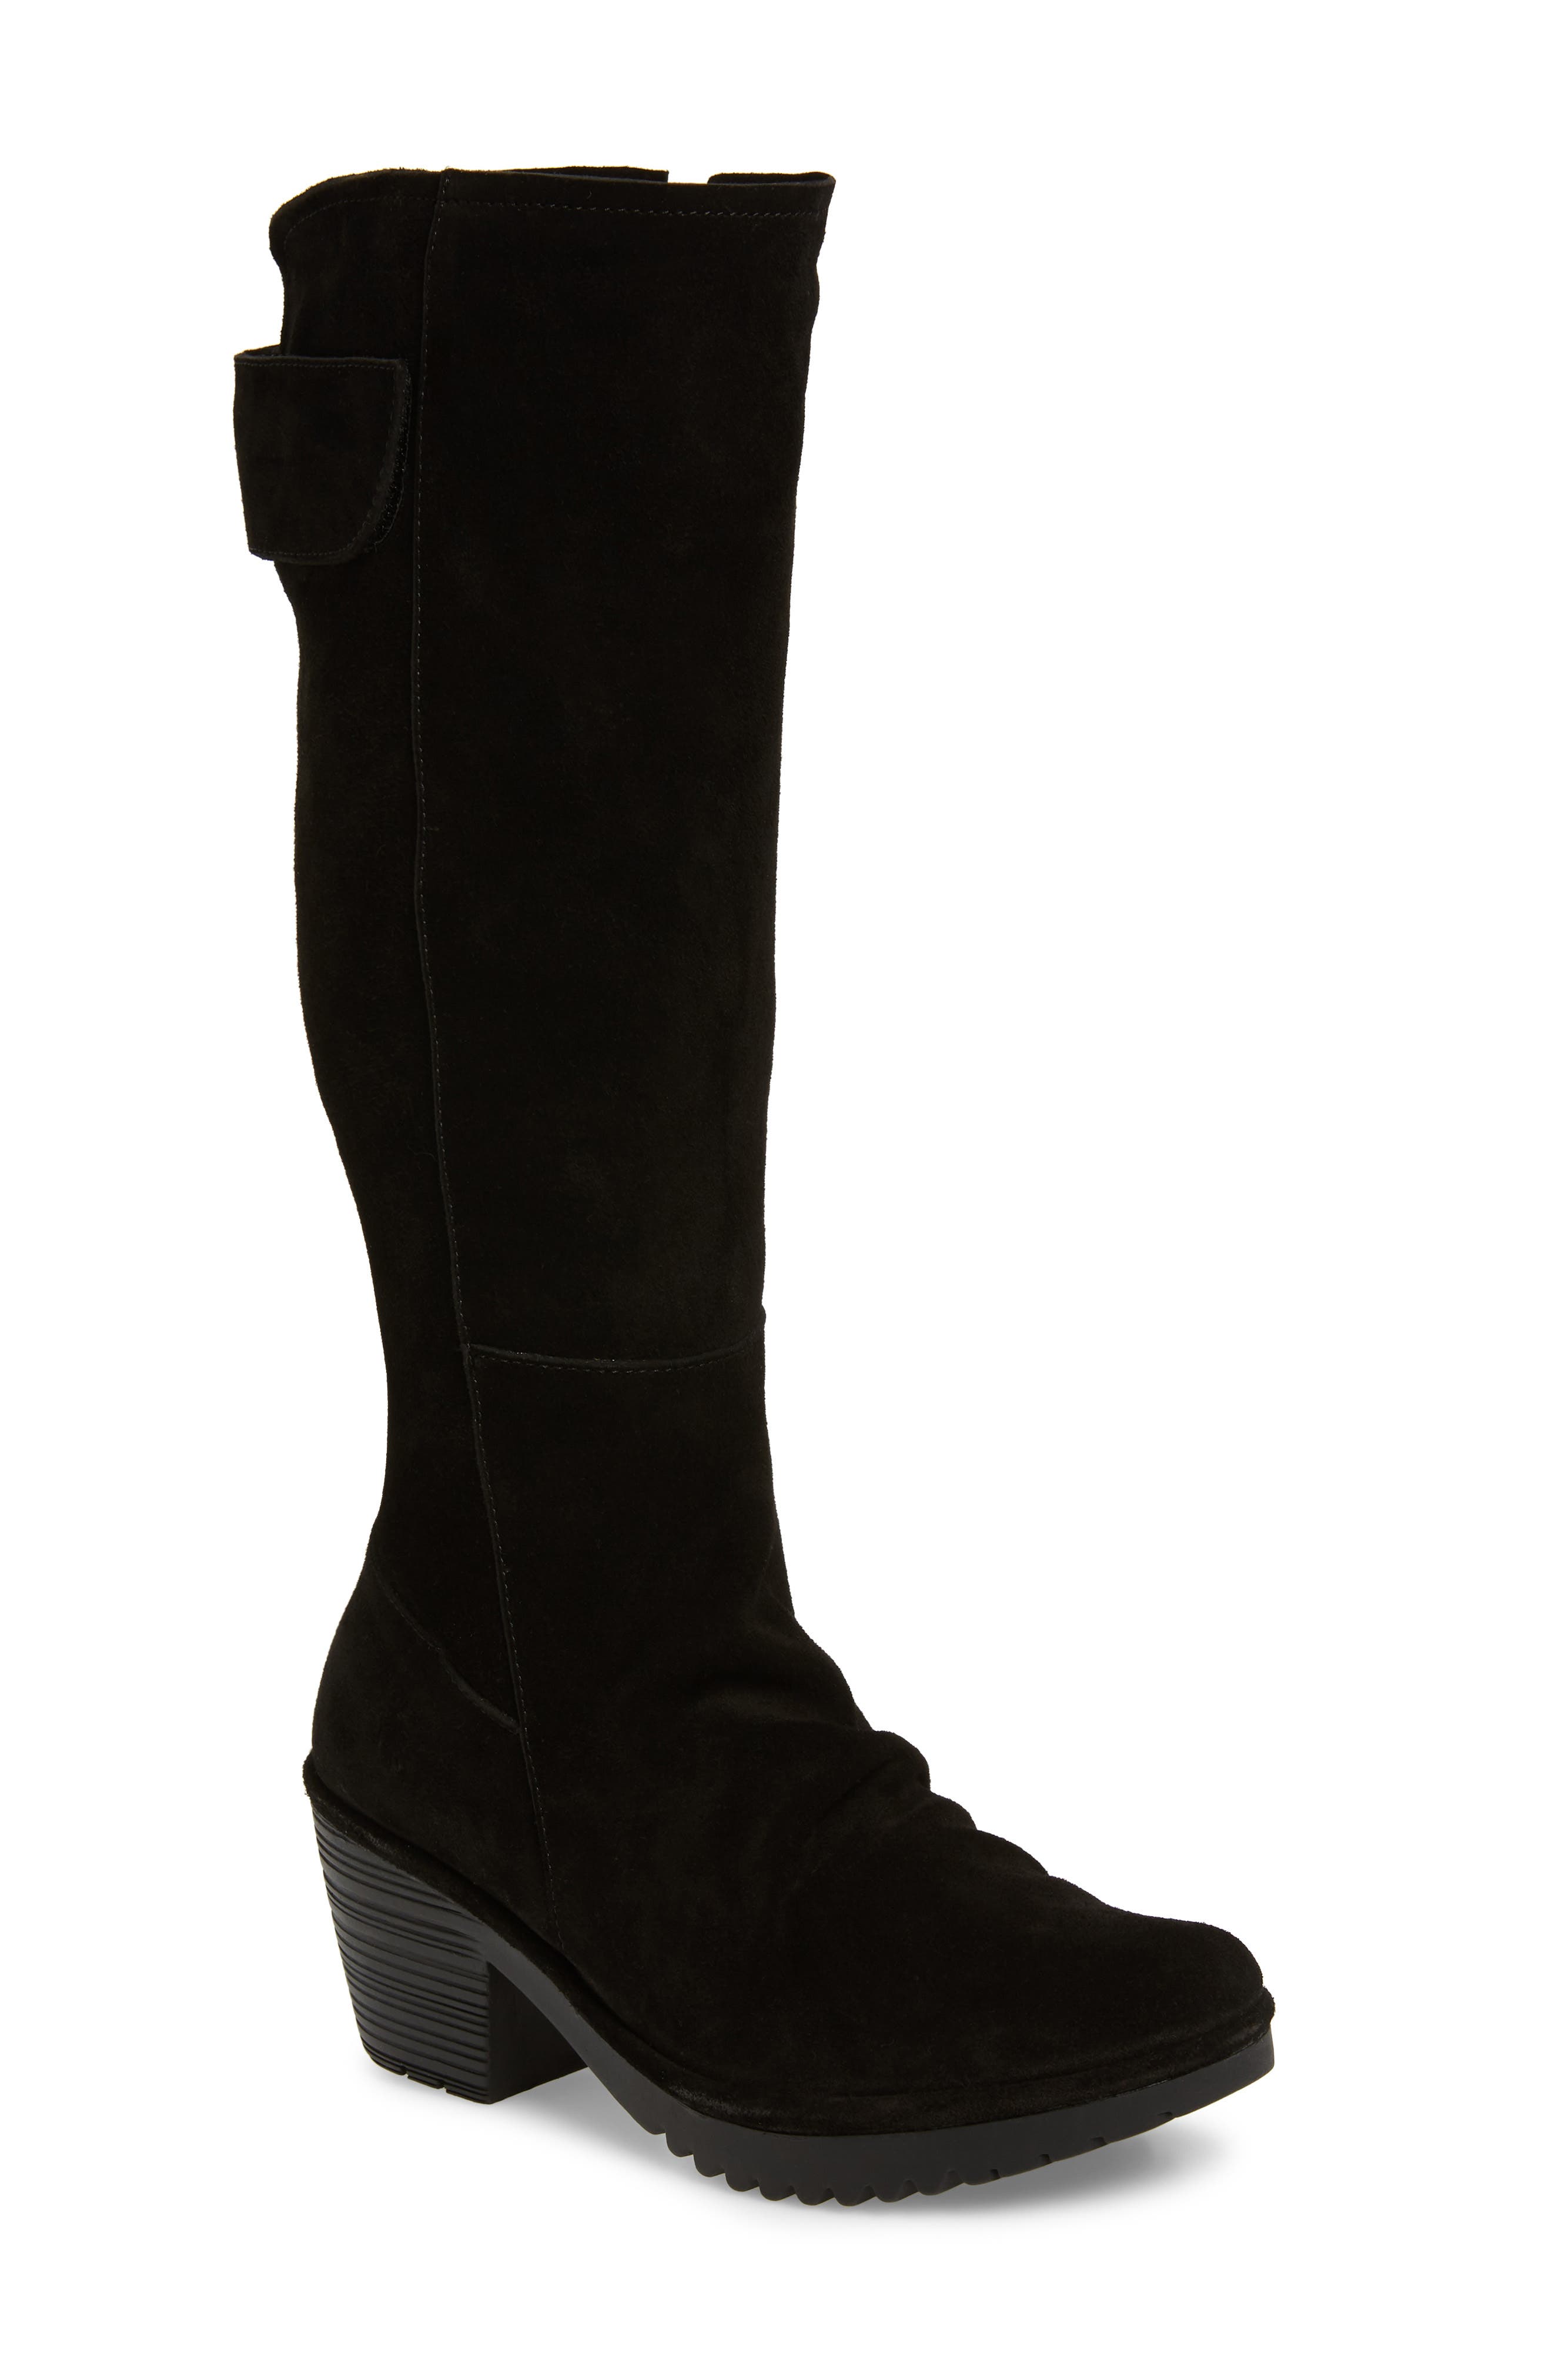 fly knee high boots